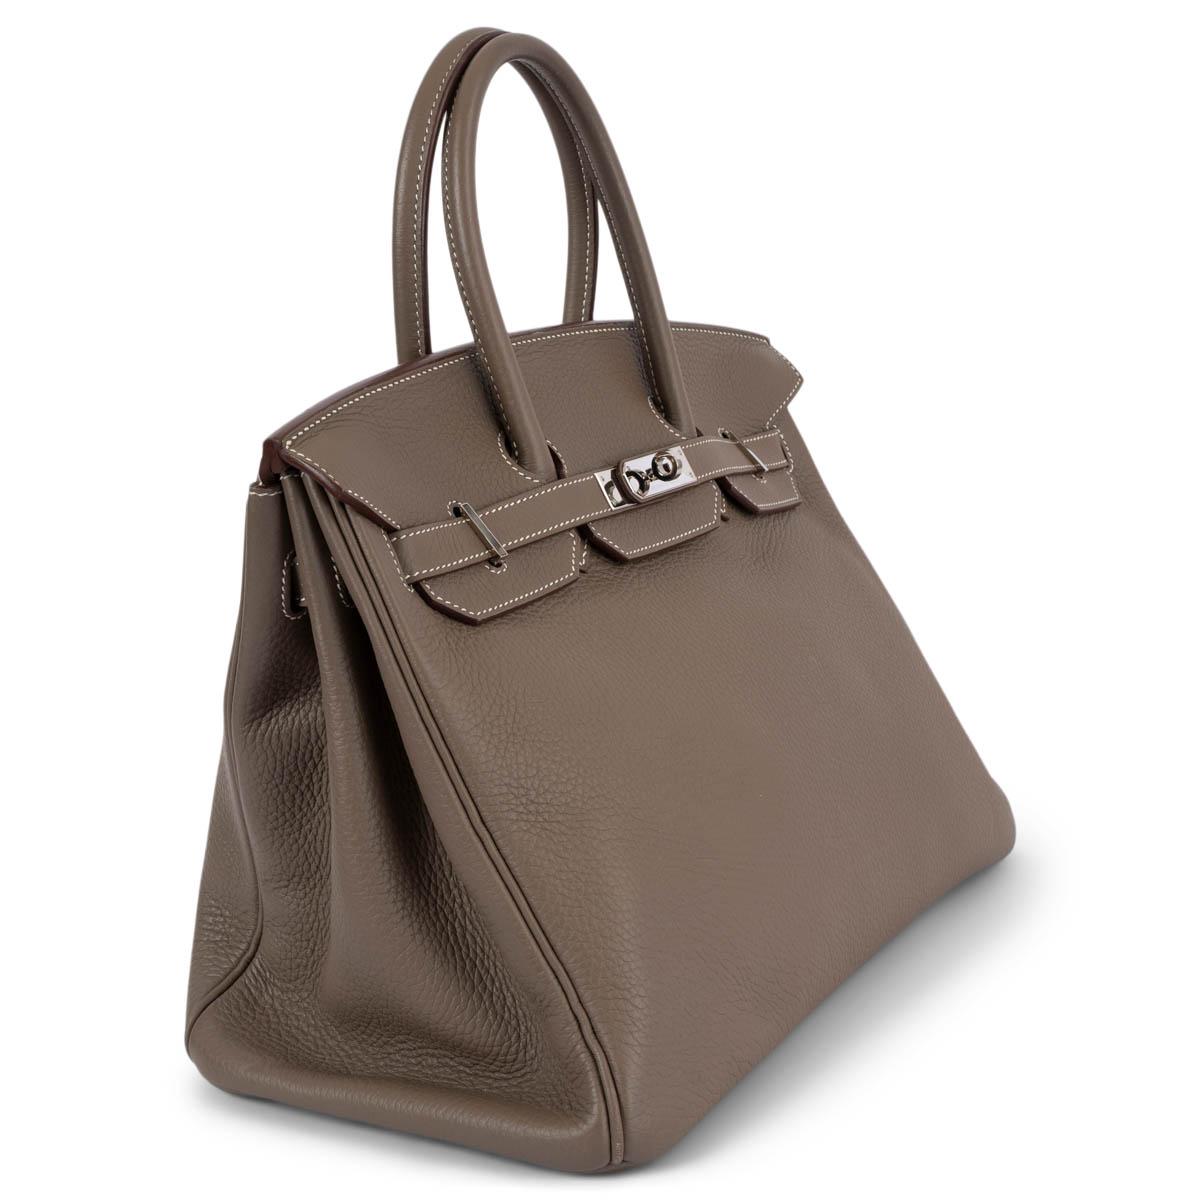 100% authentic Hermès Birkin 35 bag in Etoupe (taupe) Veau Togo leather with palladium hardware. Lined in Chevre (goat skin) with an open pocket against the front and a zipper pocket against the back. Has been carried with a slight dent in the flap